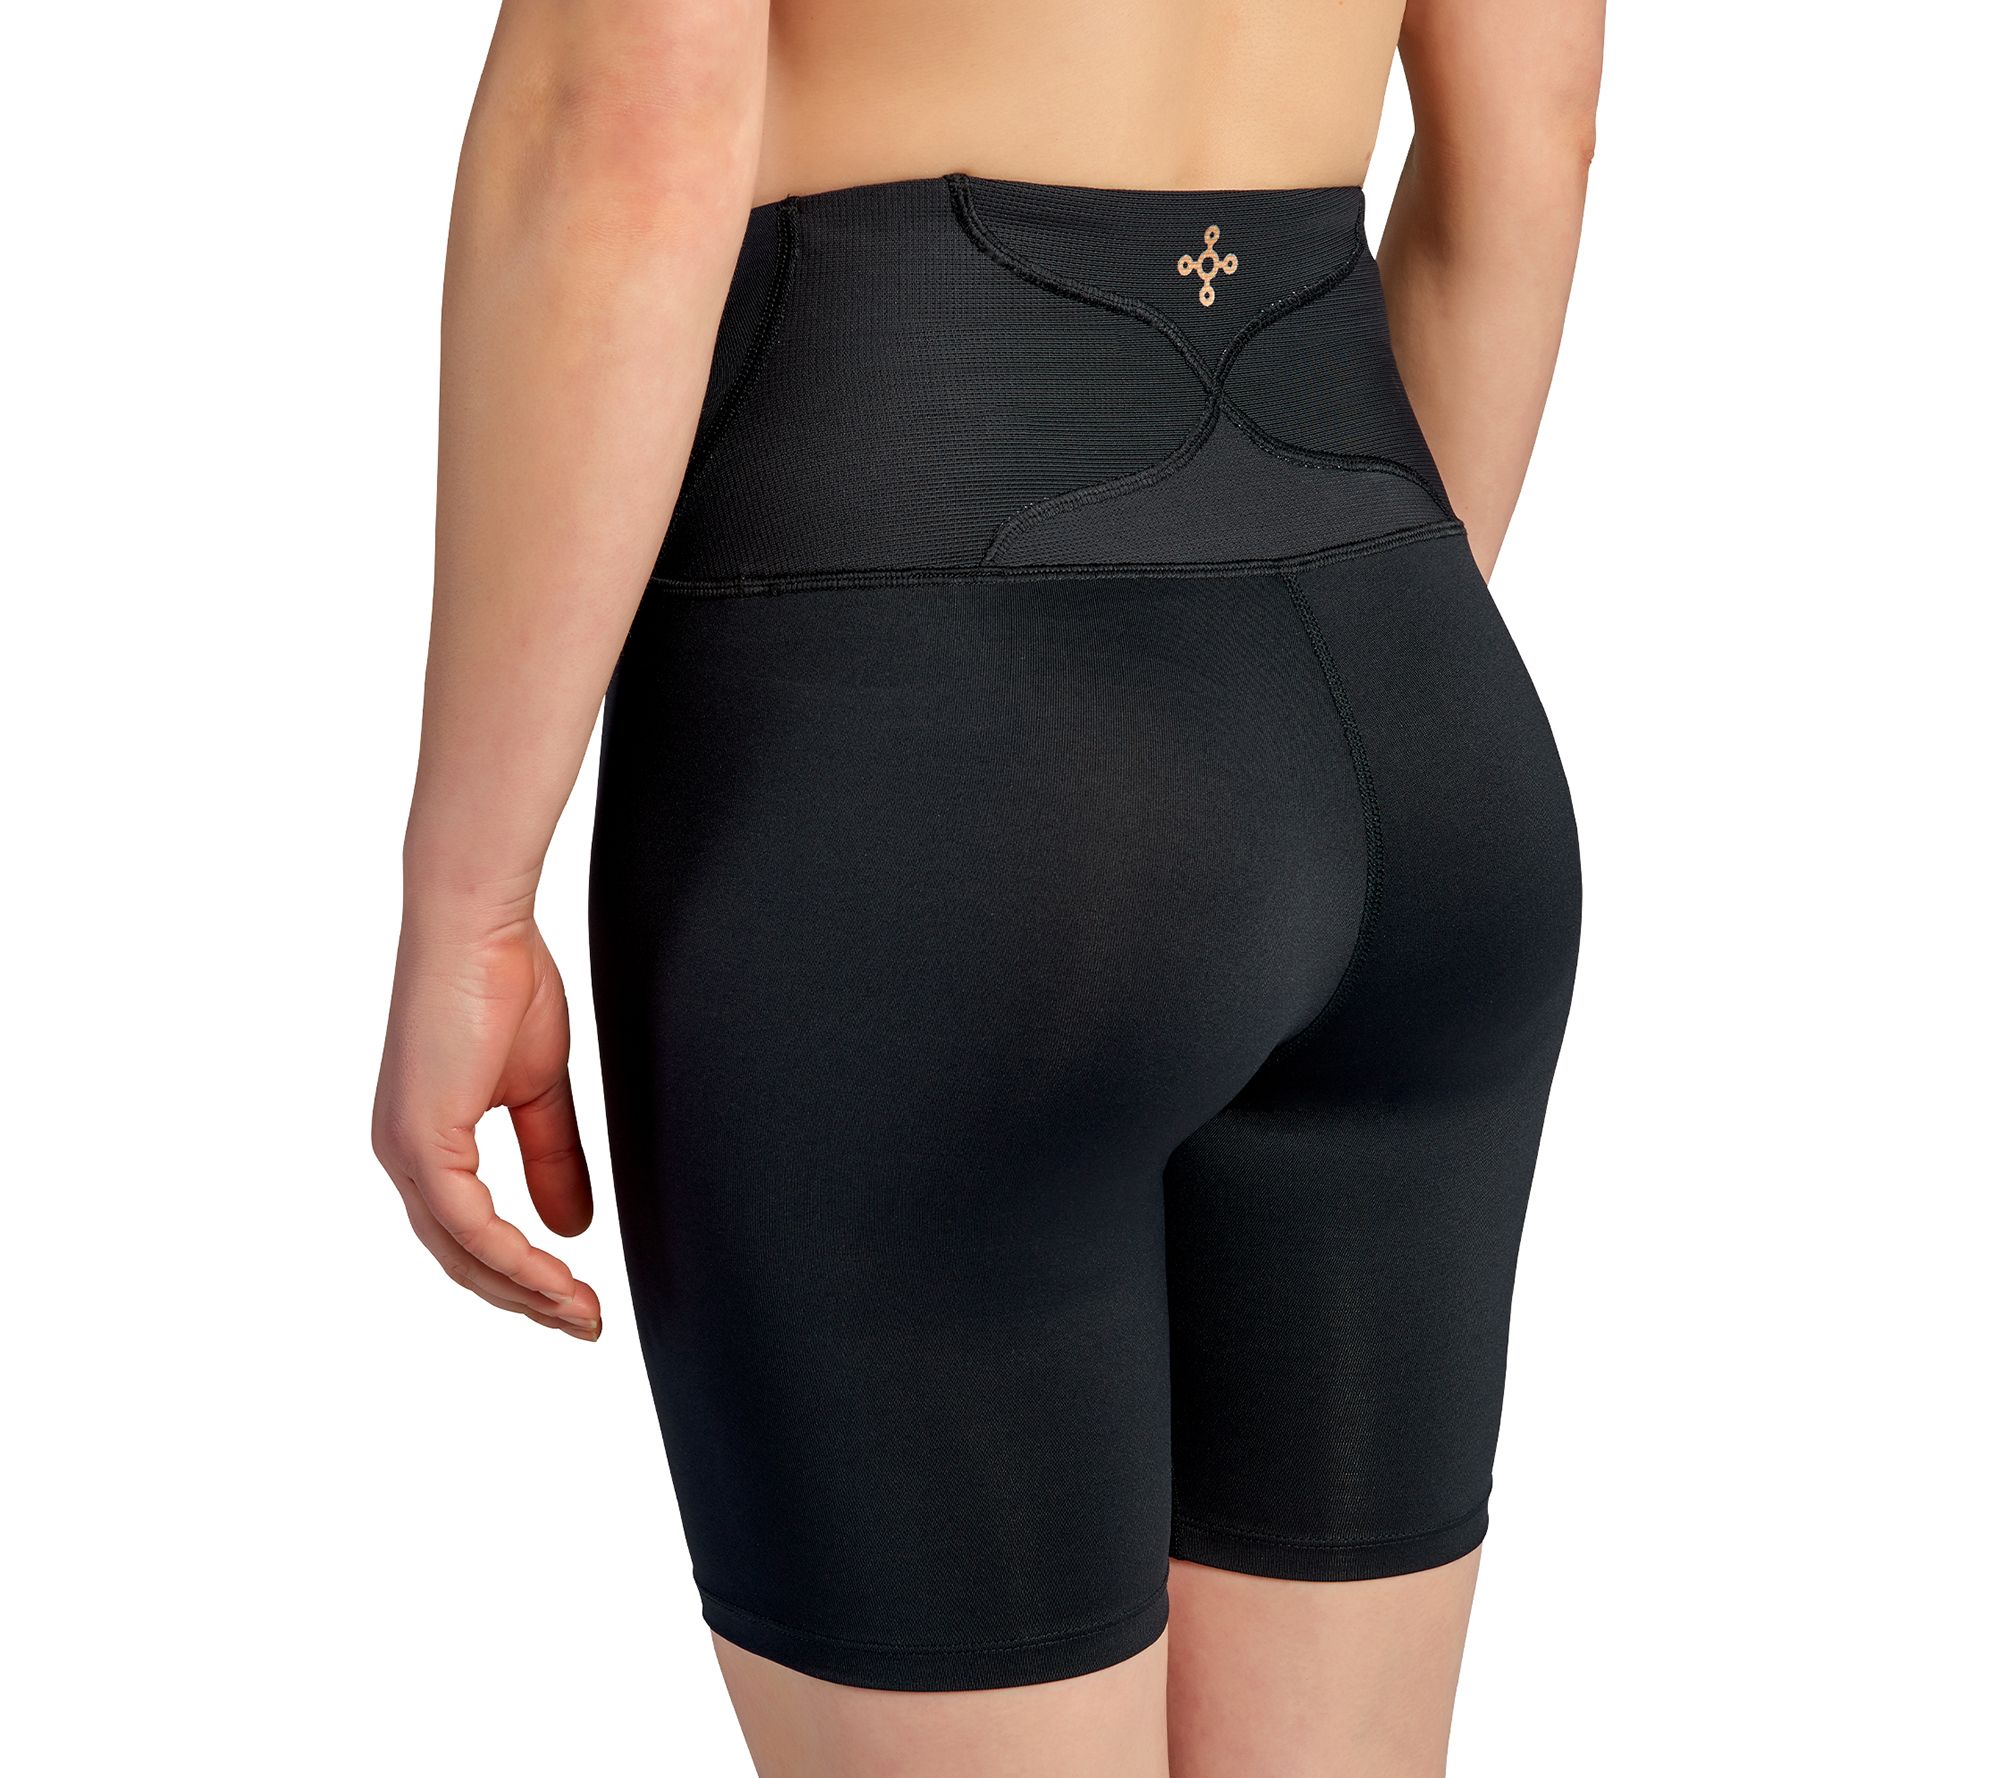 Tommie Copper Women's Back Support Compression Undershorts 